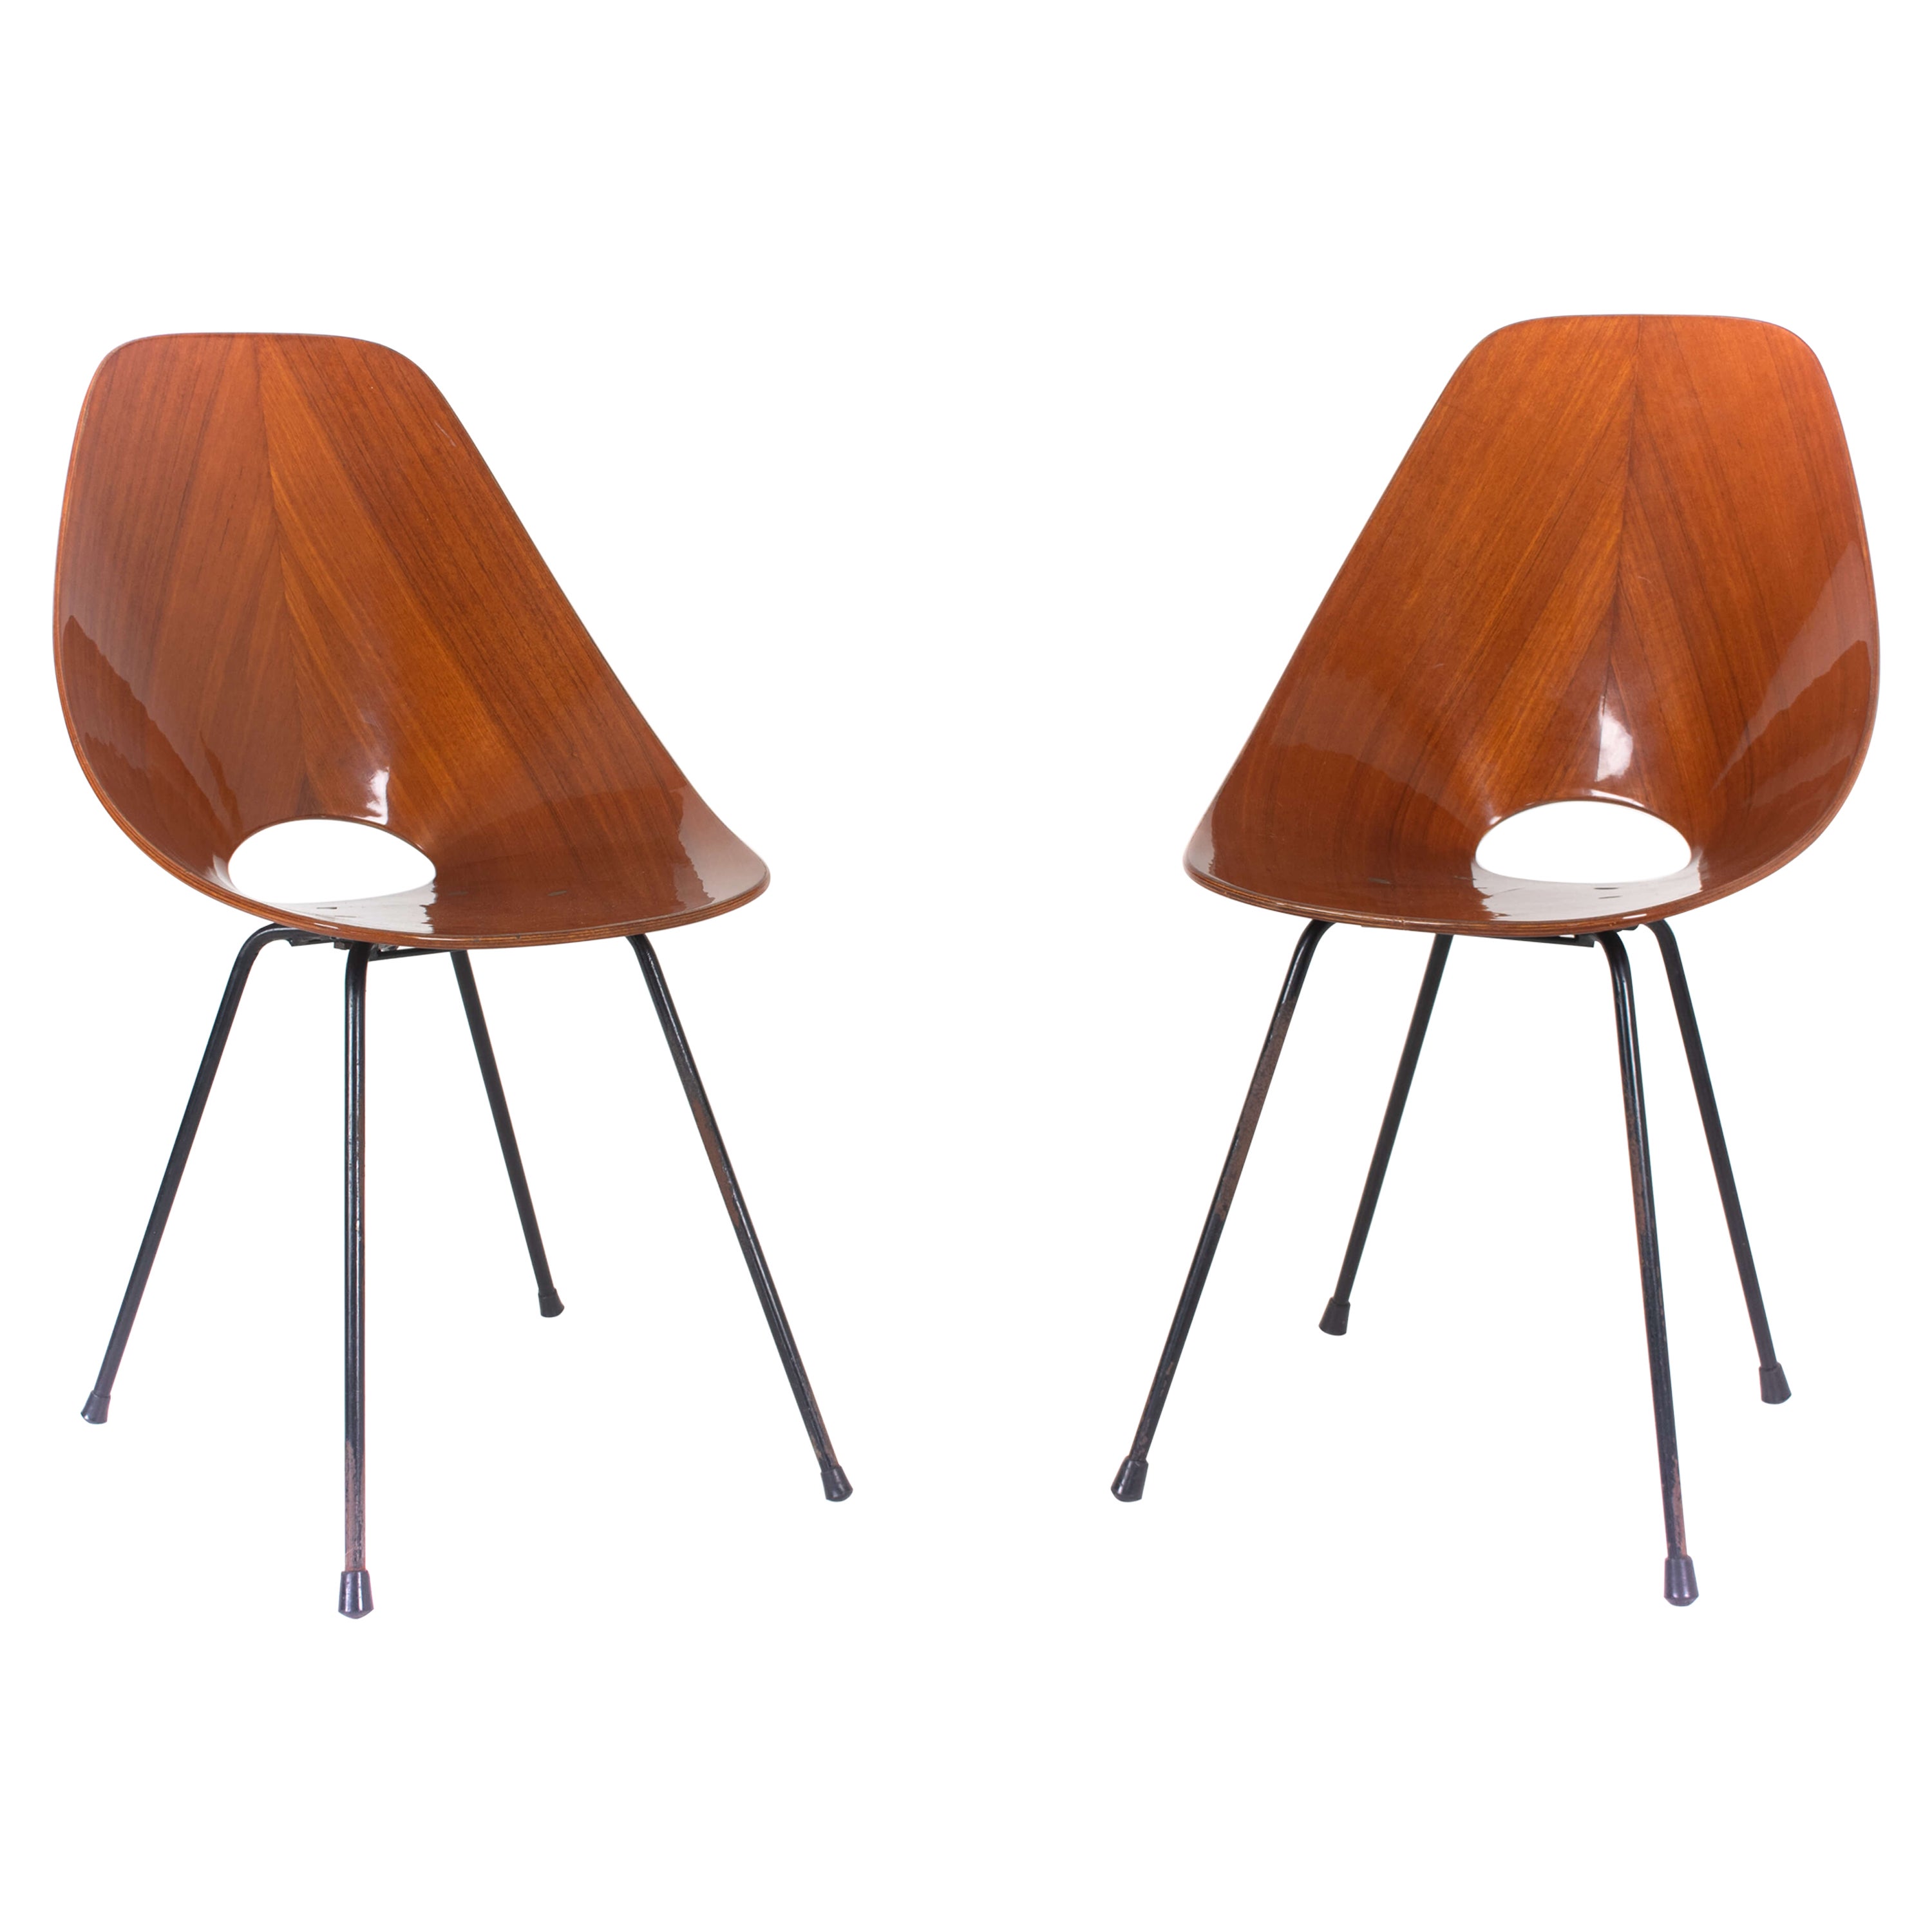 Set of Two Medea Chairs by Vittorio Nobili for Fratelli Tagliabue, Italy, 1950s